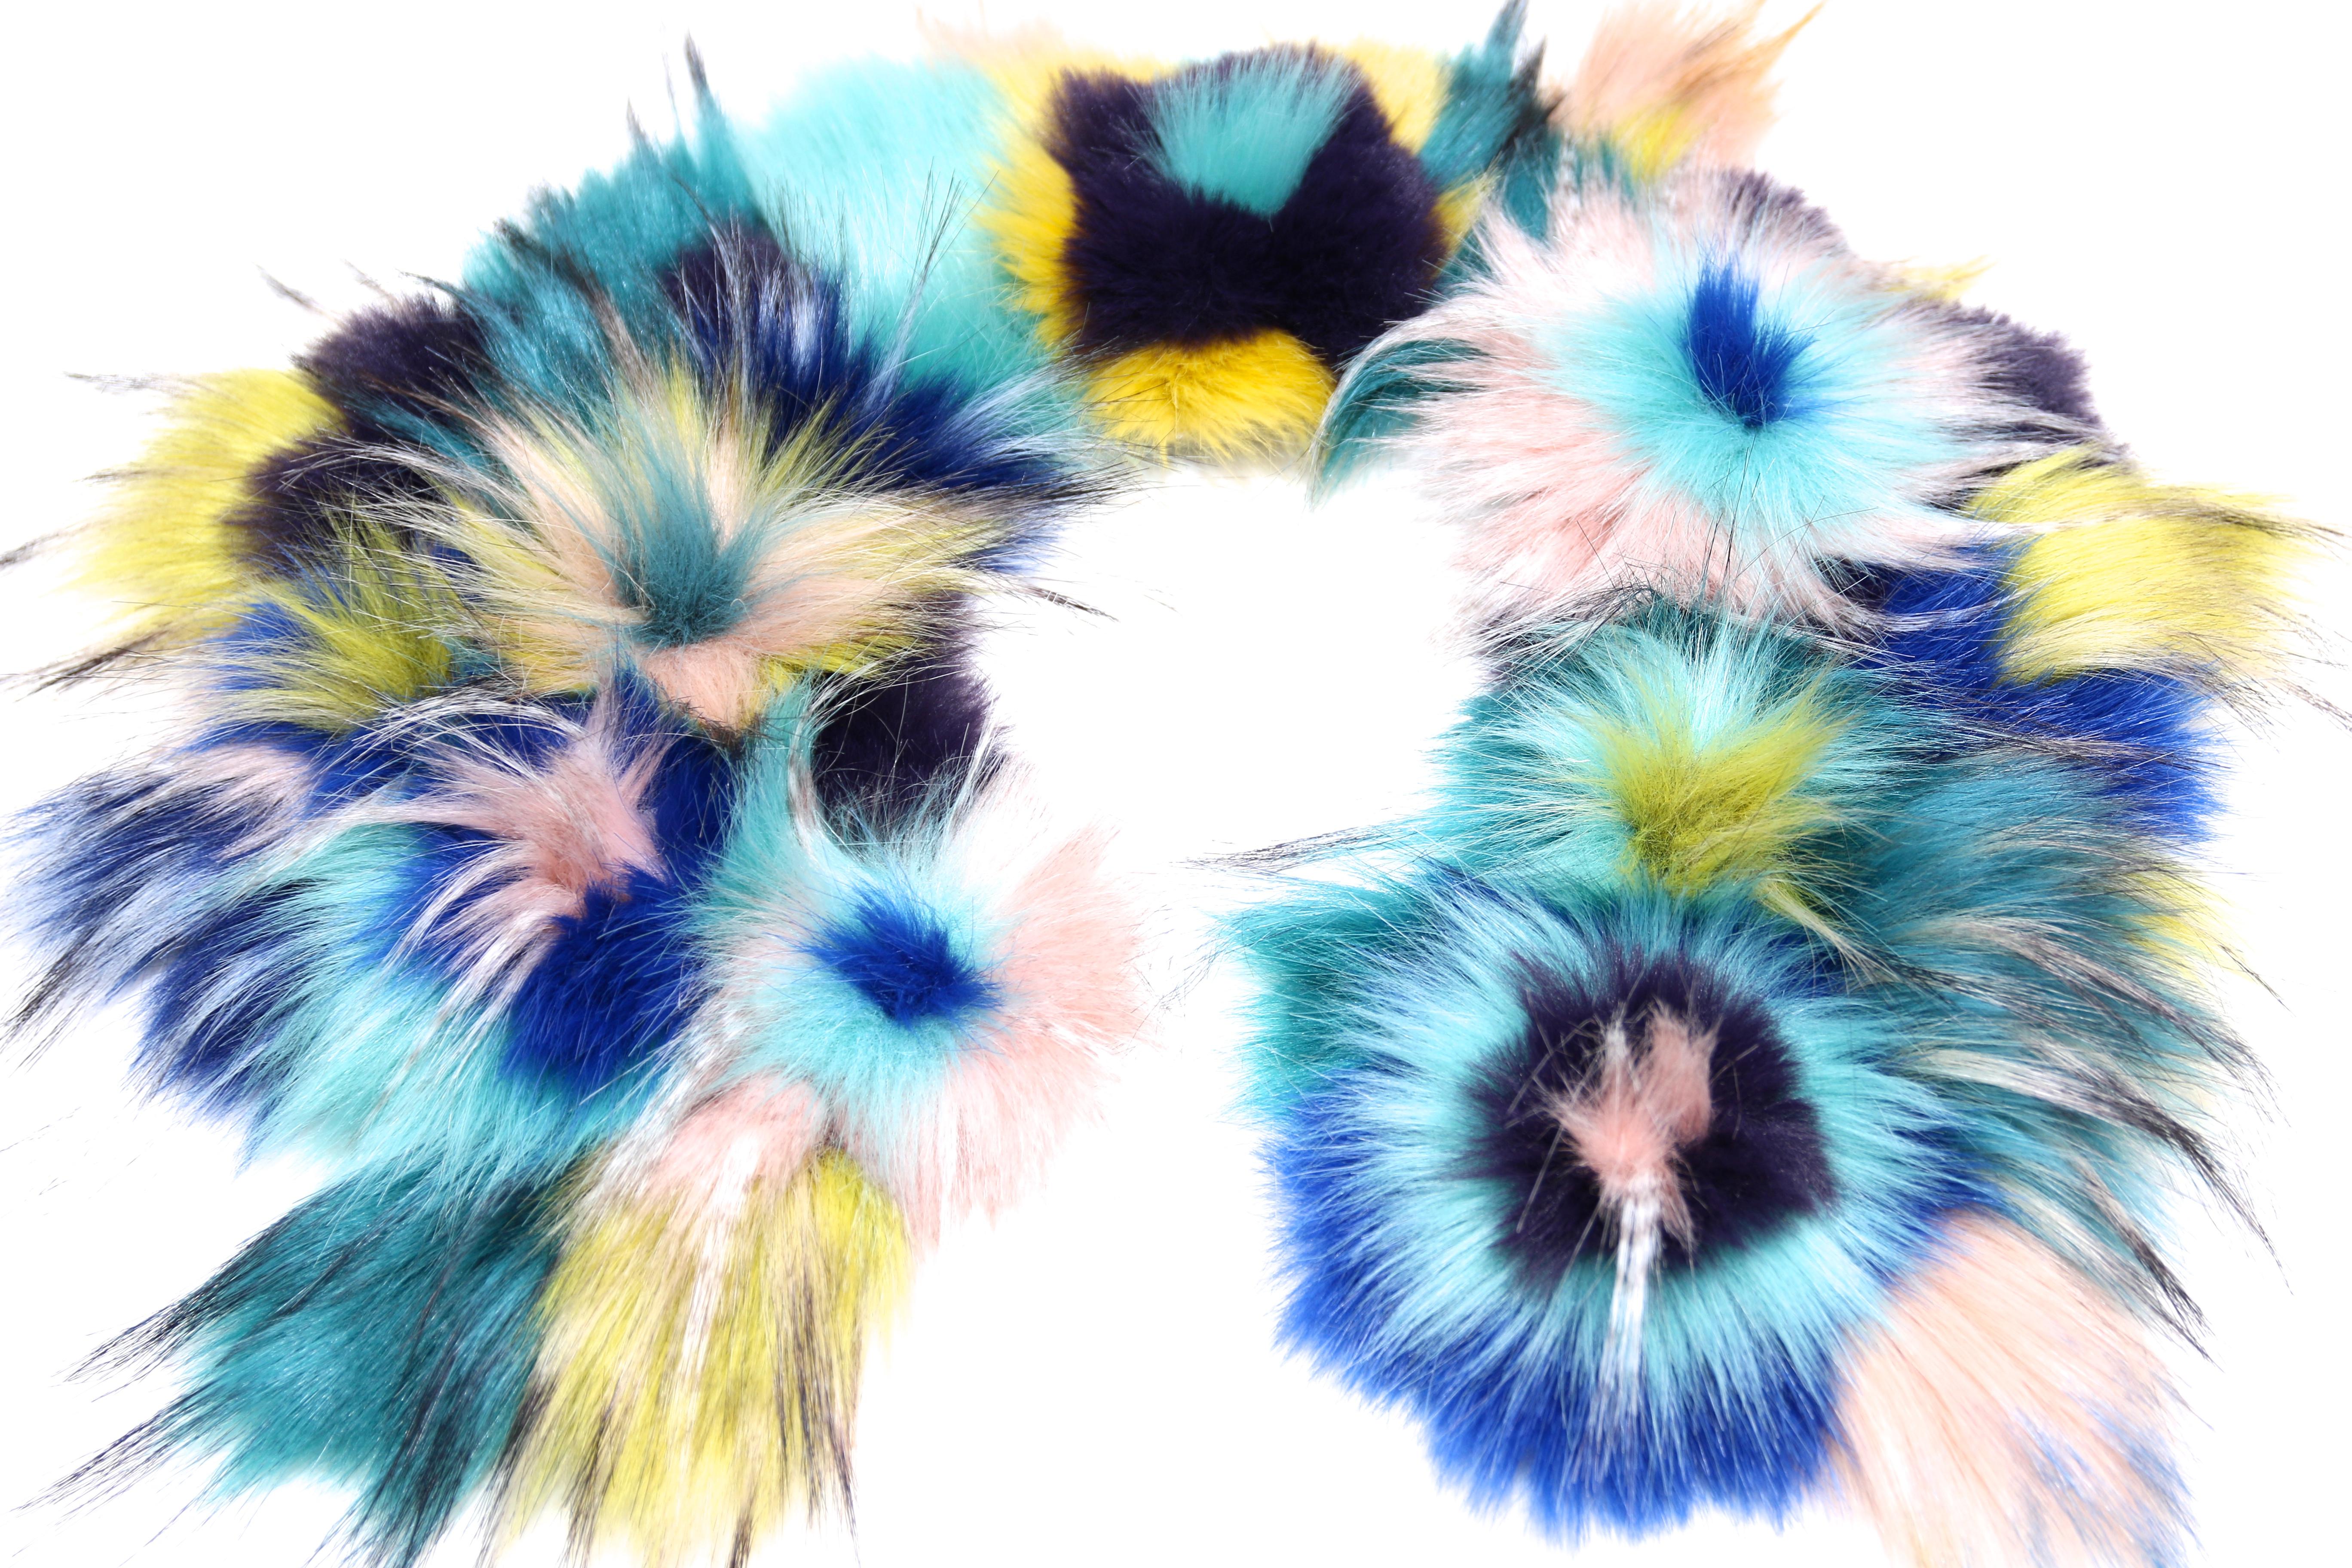 The Violetta Pelush multi color faux fur collar with three dimensional flowers is a one of a kind exclusive Couture piece. Featuring the highest quality man made pelage, this unique and playful accessory is a beautiful reproduction of the fox, mink